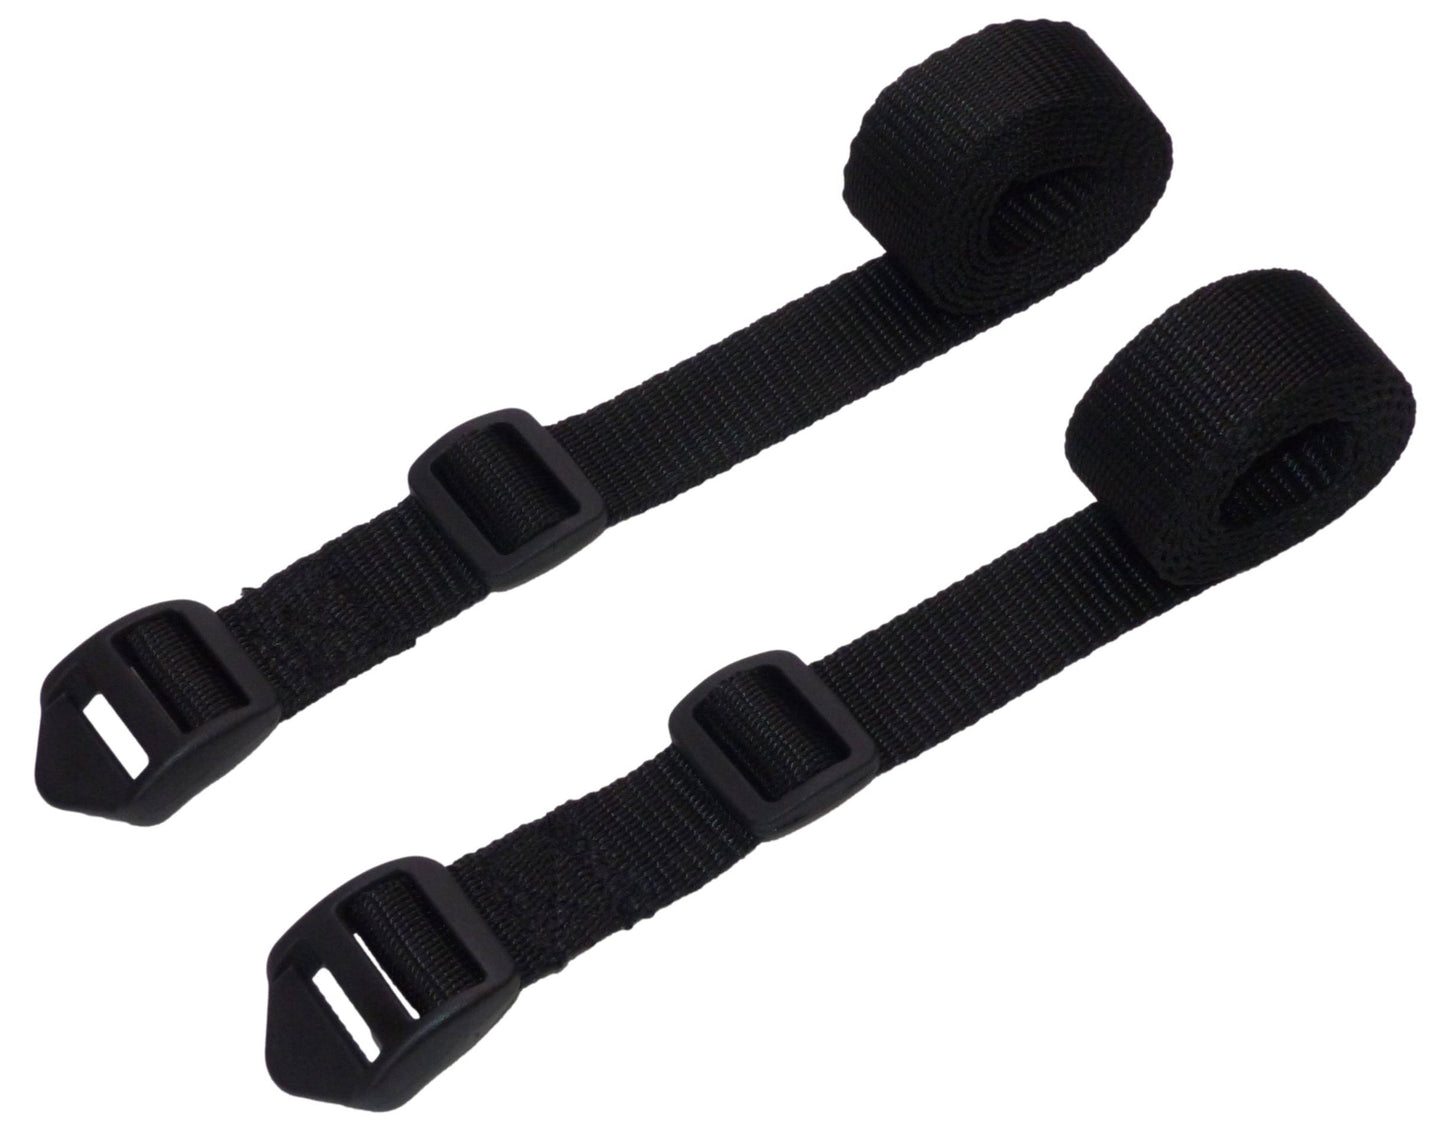 The Benristraps 25mm Camping Straps, 150cm (pair) in black